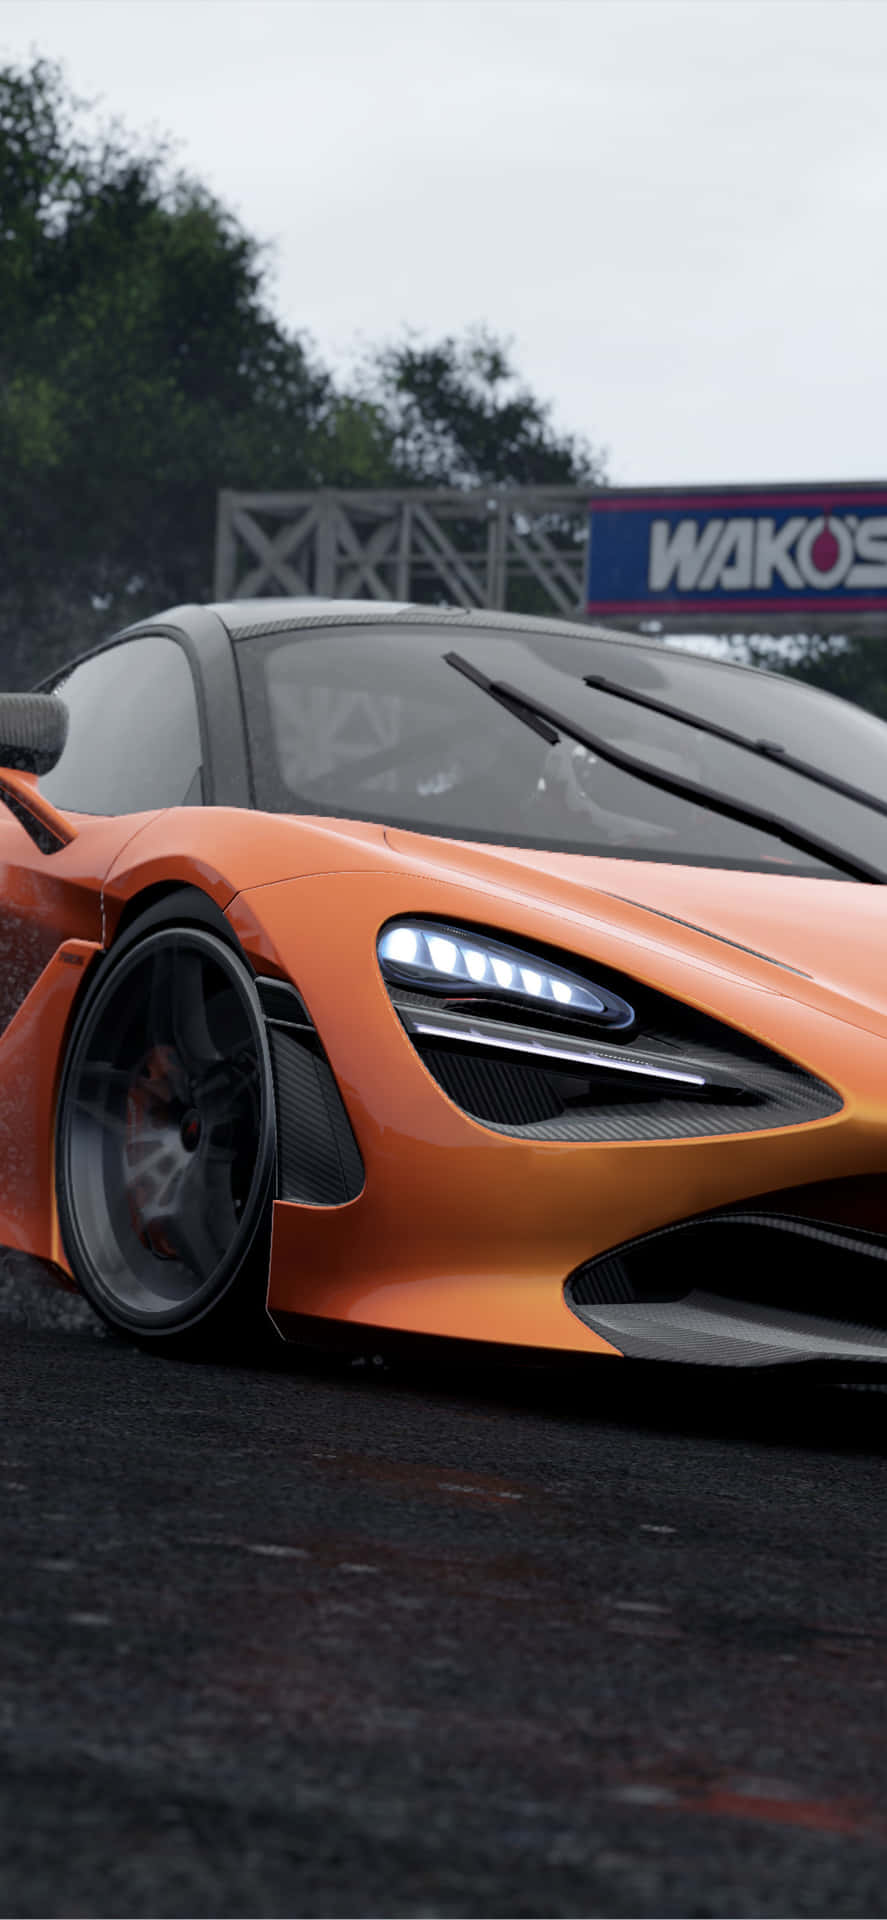 Revel in the thrills of the fast-paced world of Project Cars 2 with an iphone Xs Max.